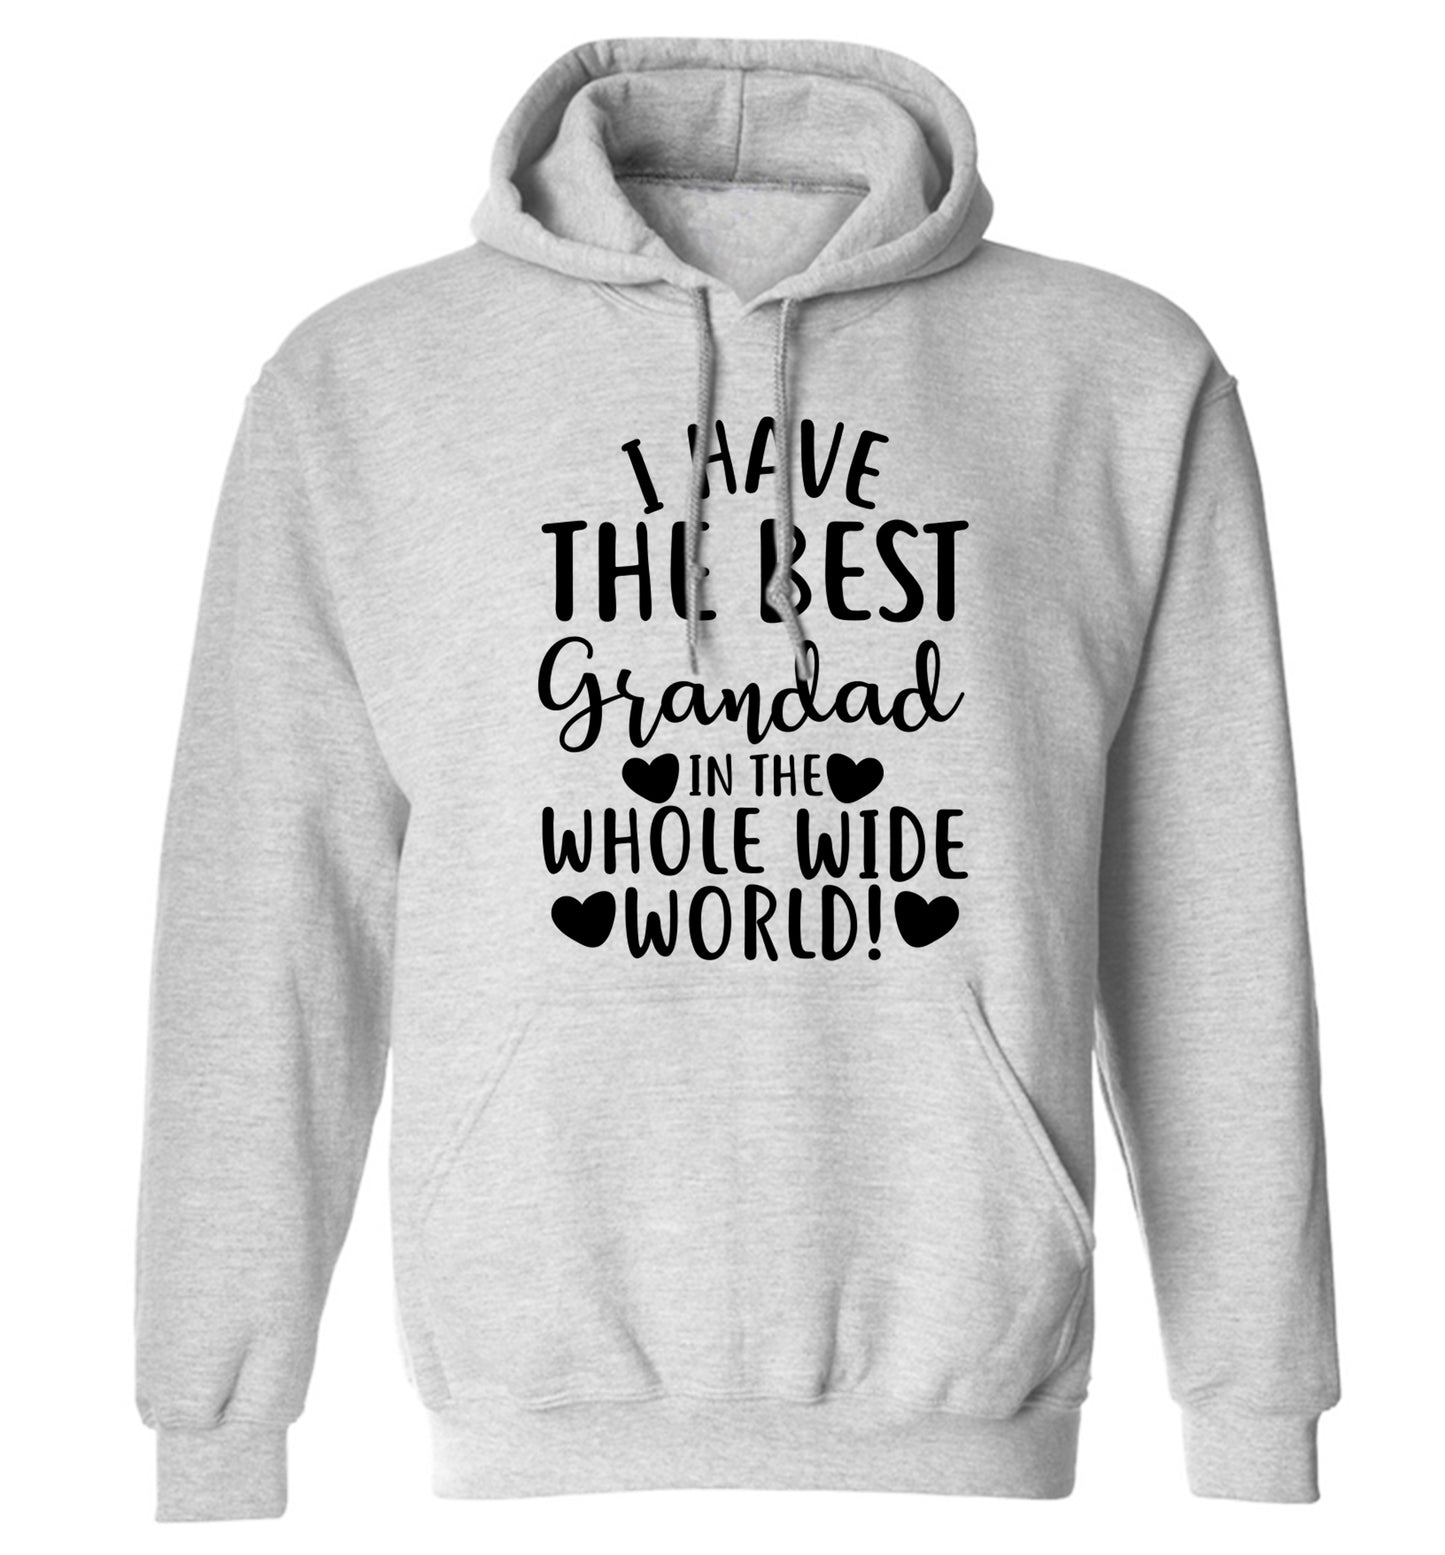 I have the best grandad in the whole wide world! adults unisex grey hoodie 2XL